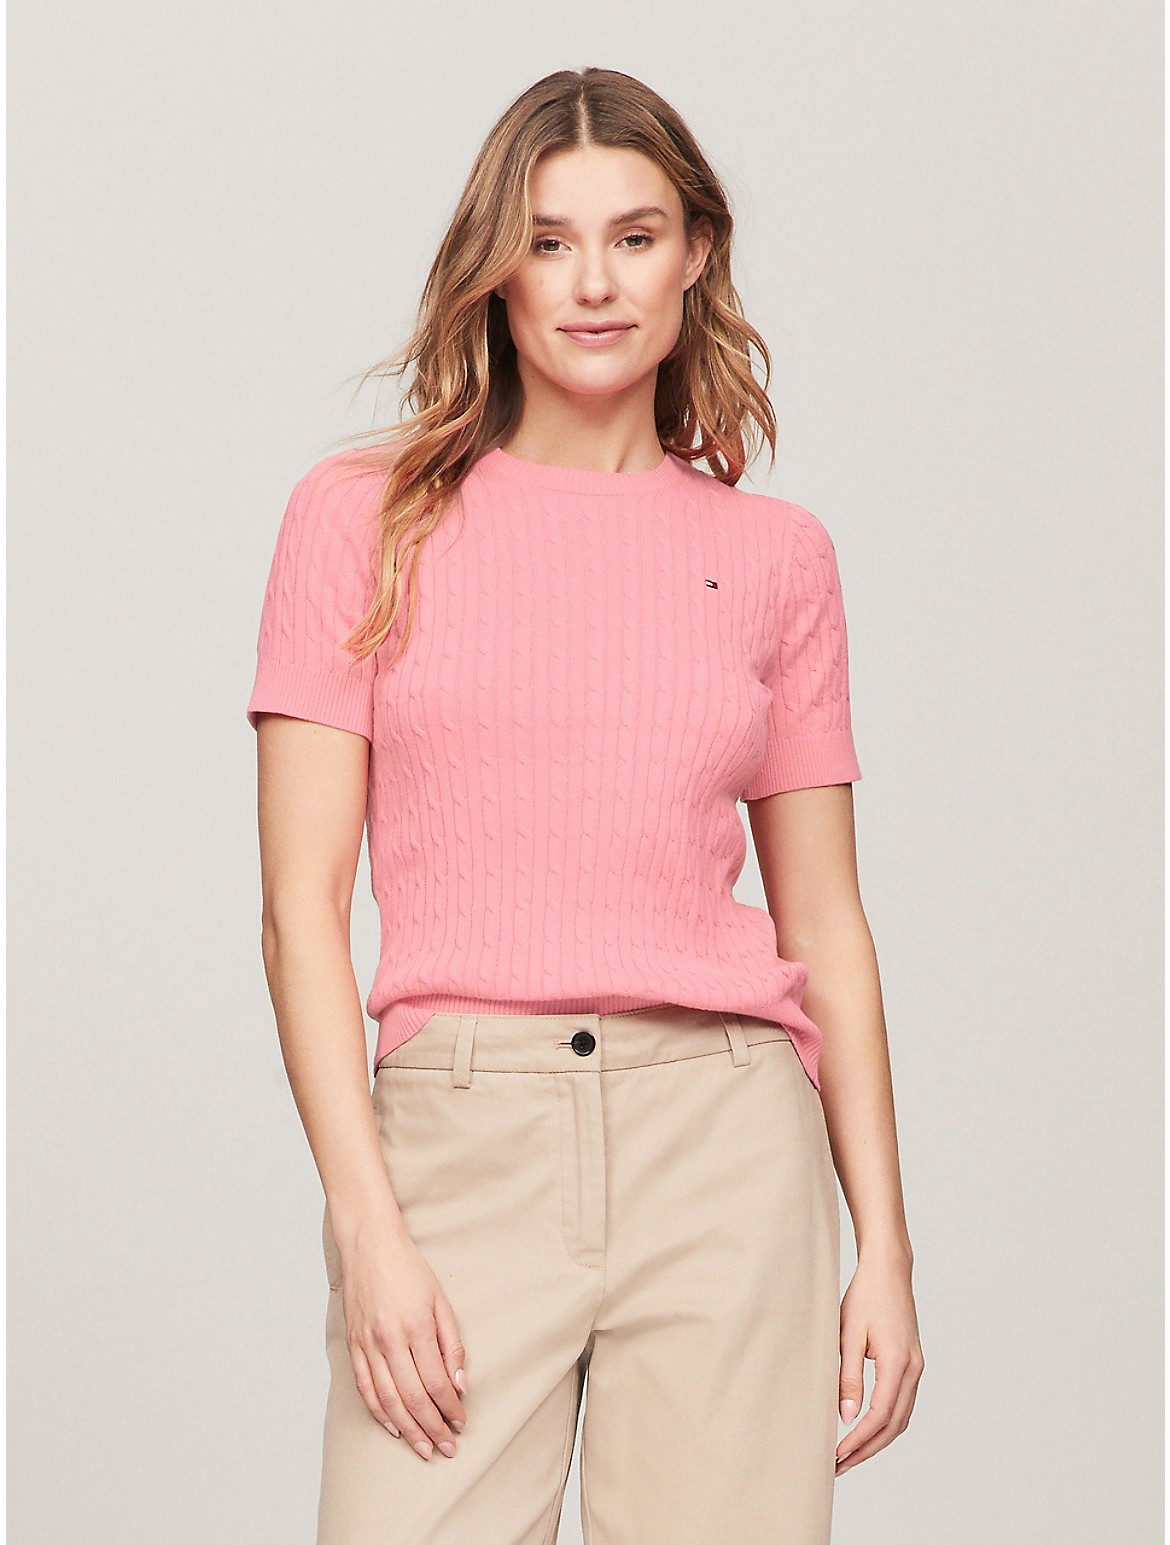 Tommy Hilfiger Women's Short-Sleeve Cable Sweater